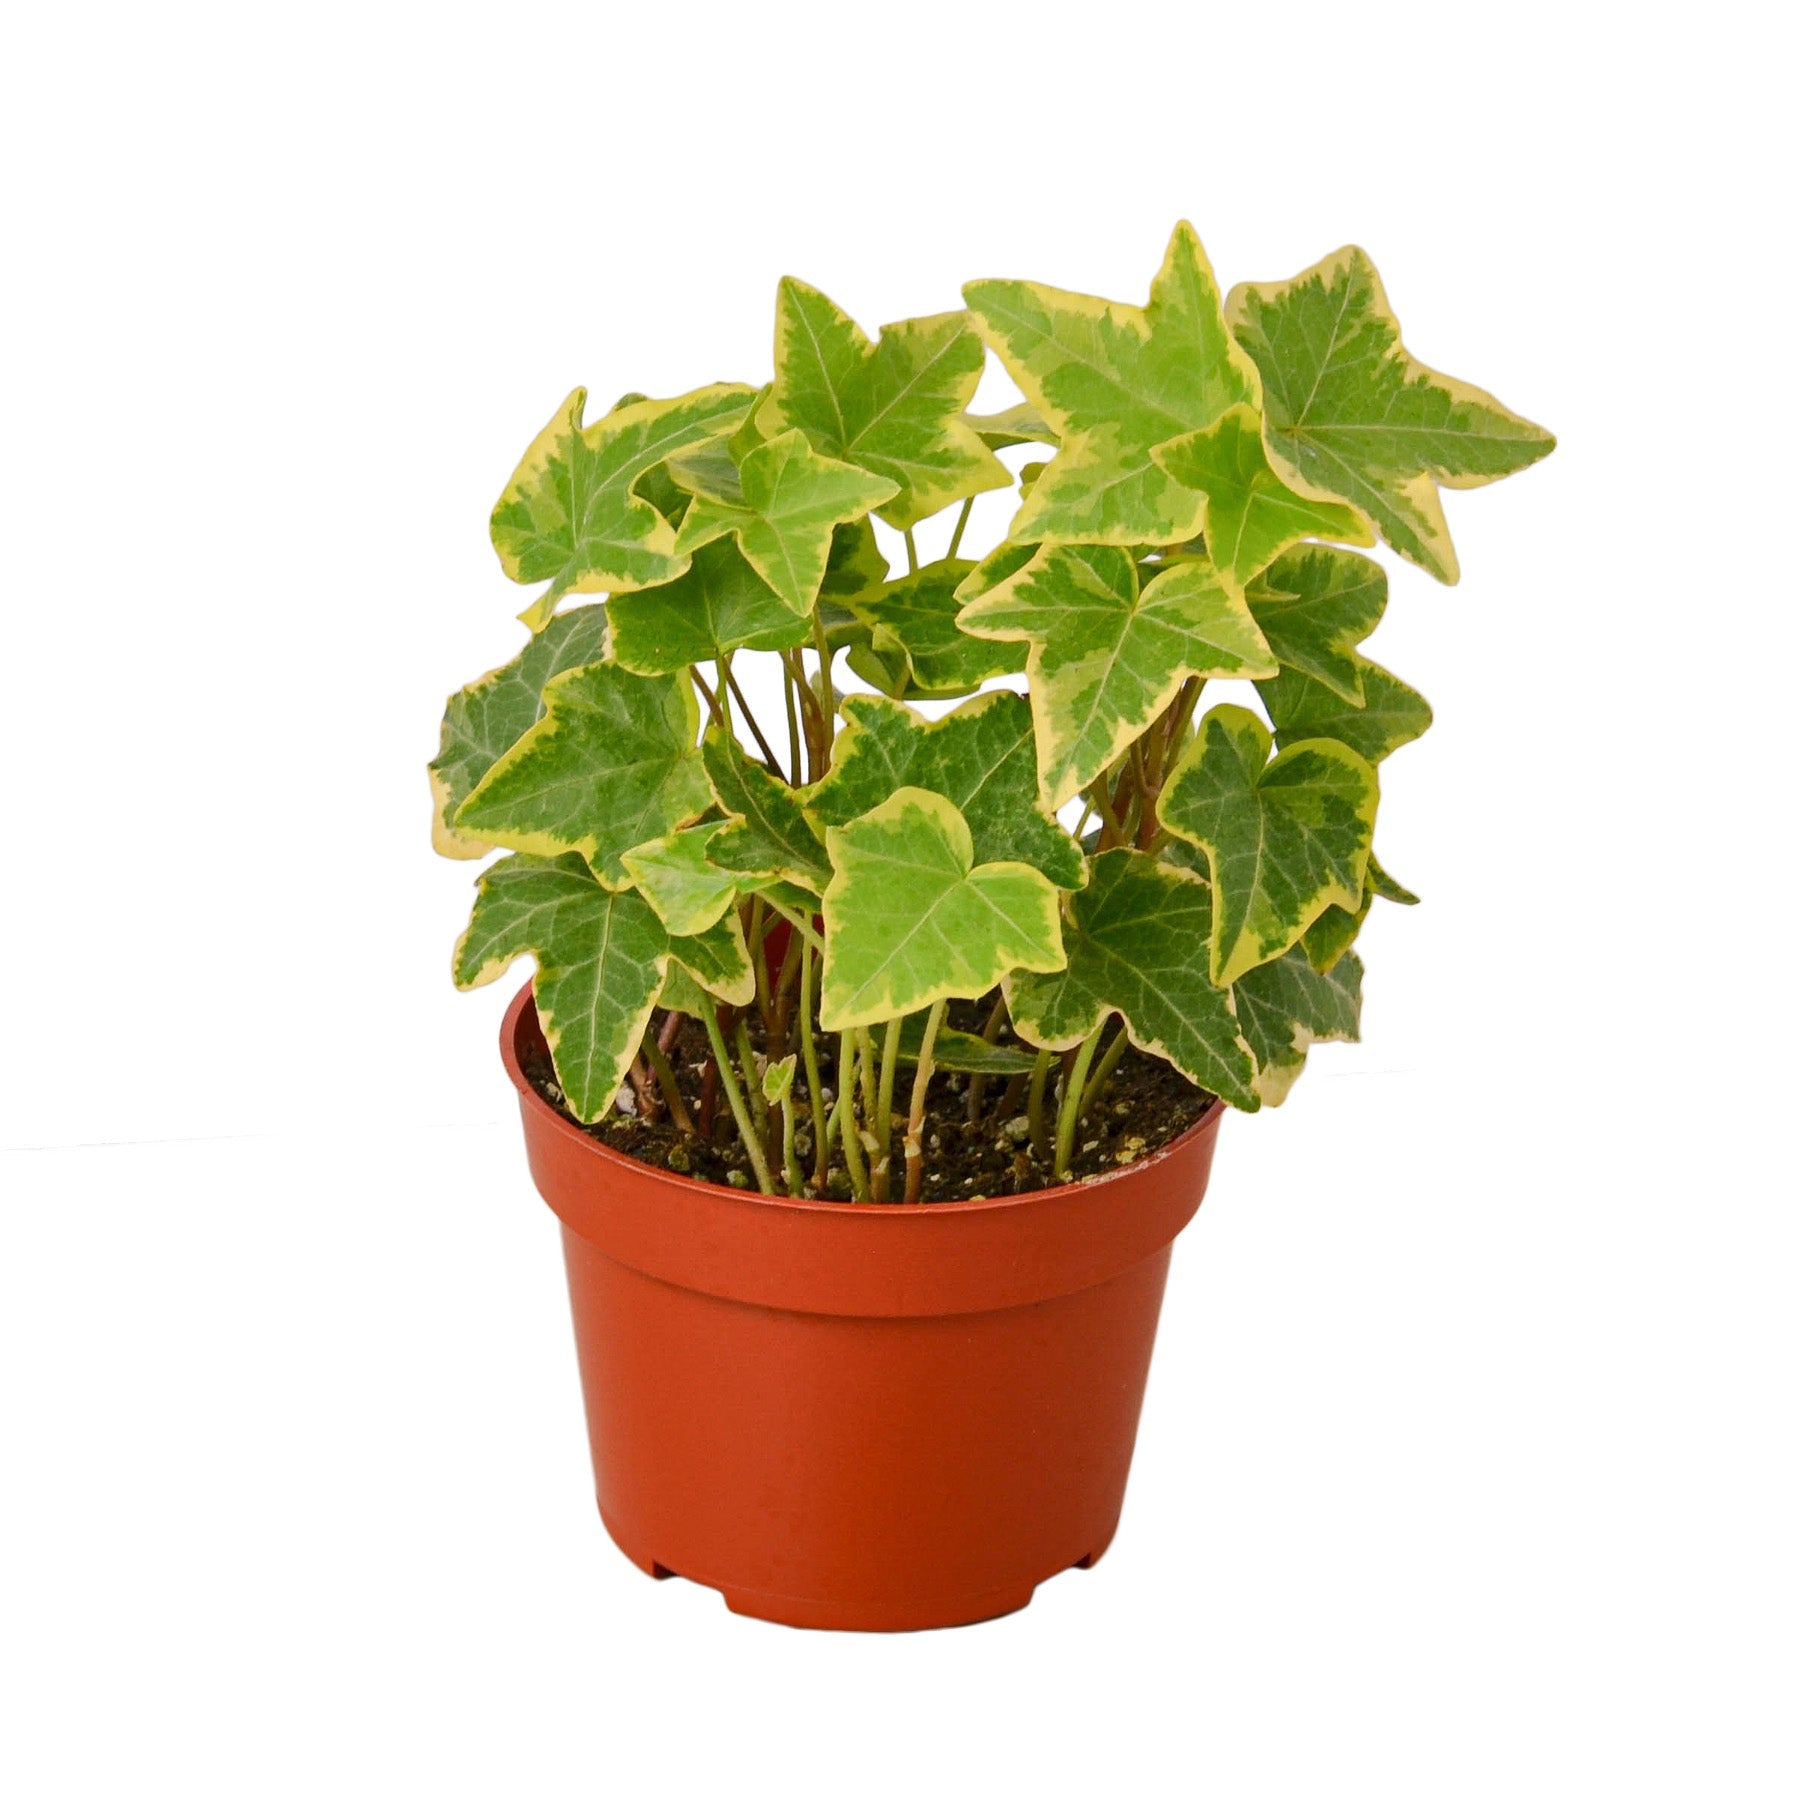 Ivy plant in a pot on a white background surrounded by top garden centers.